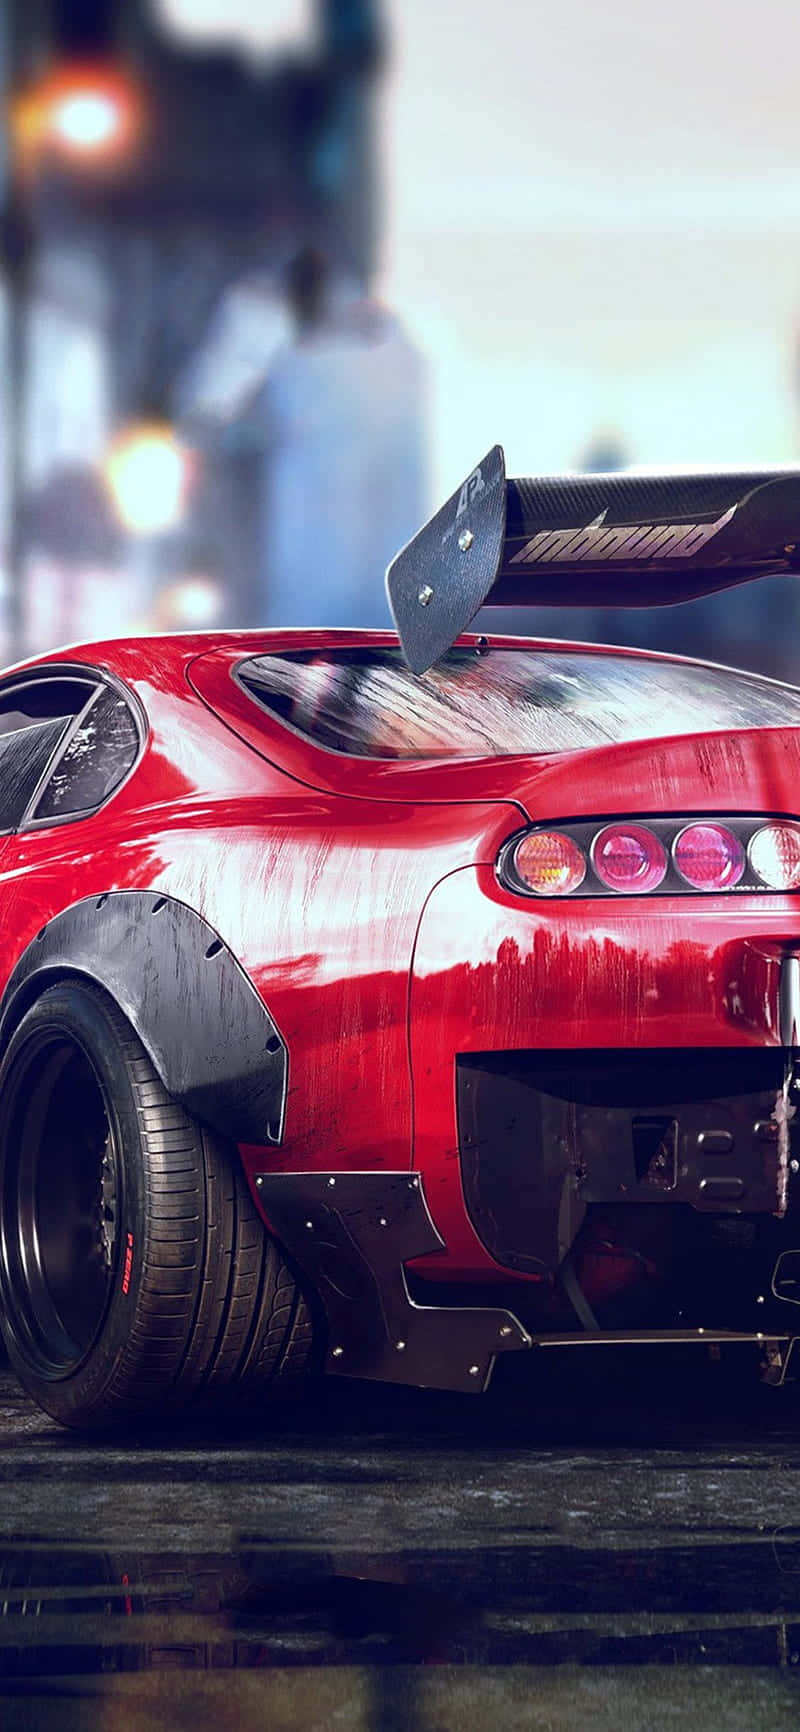 Pixel 3 Need For Speed Background Wet Red Car 800 x 1732 Background